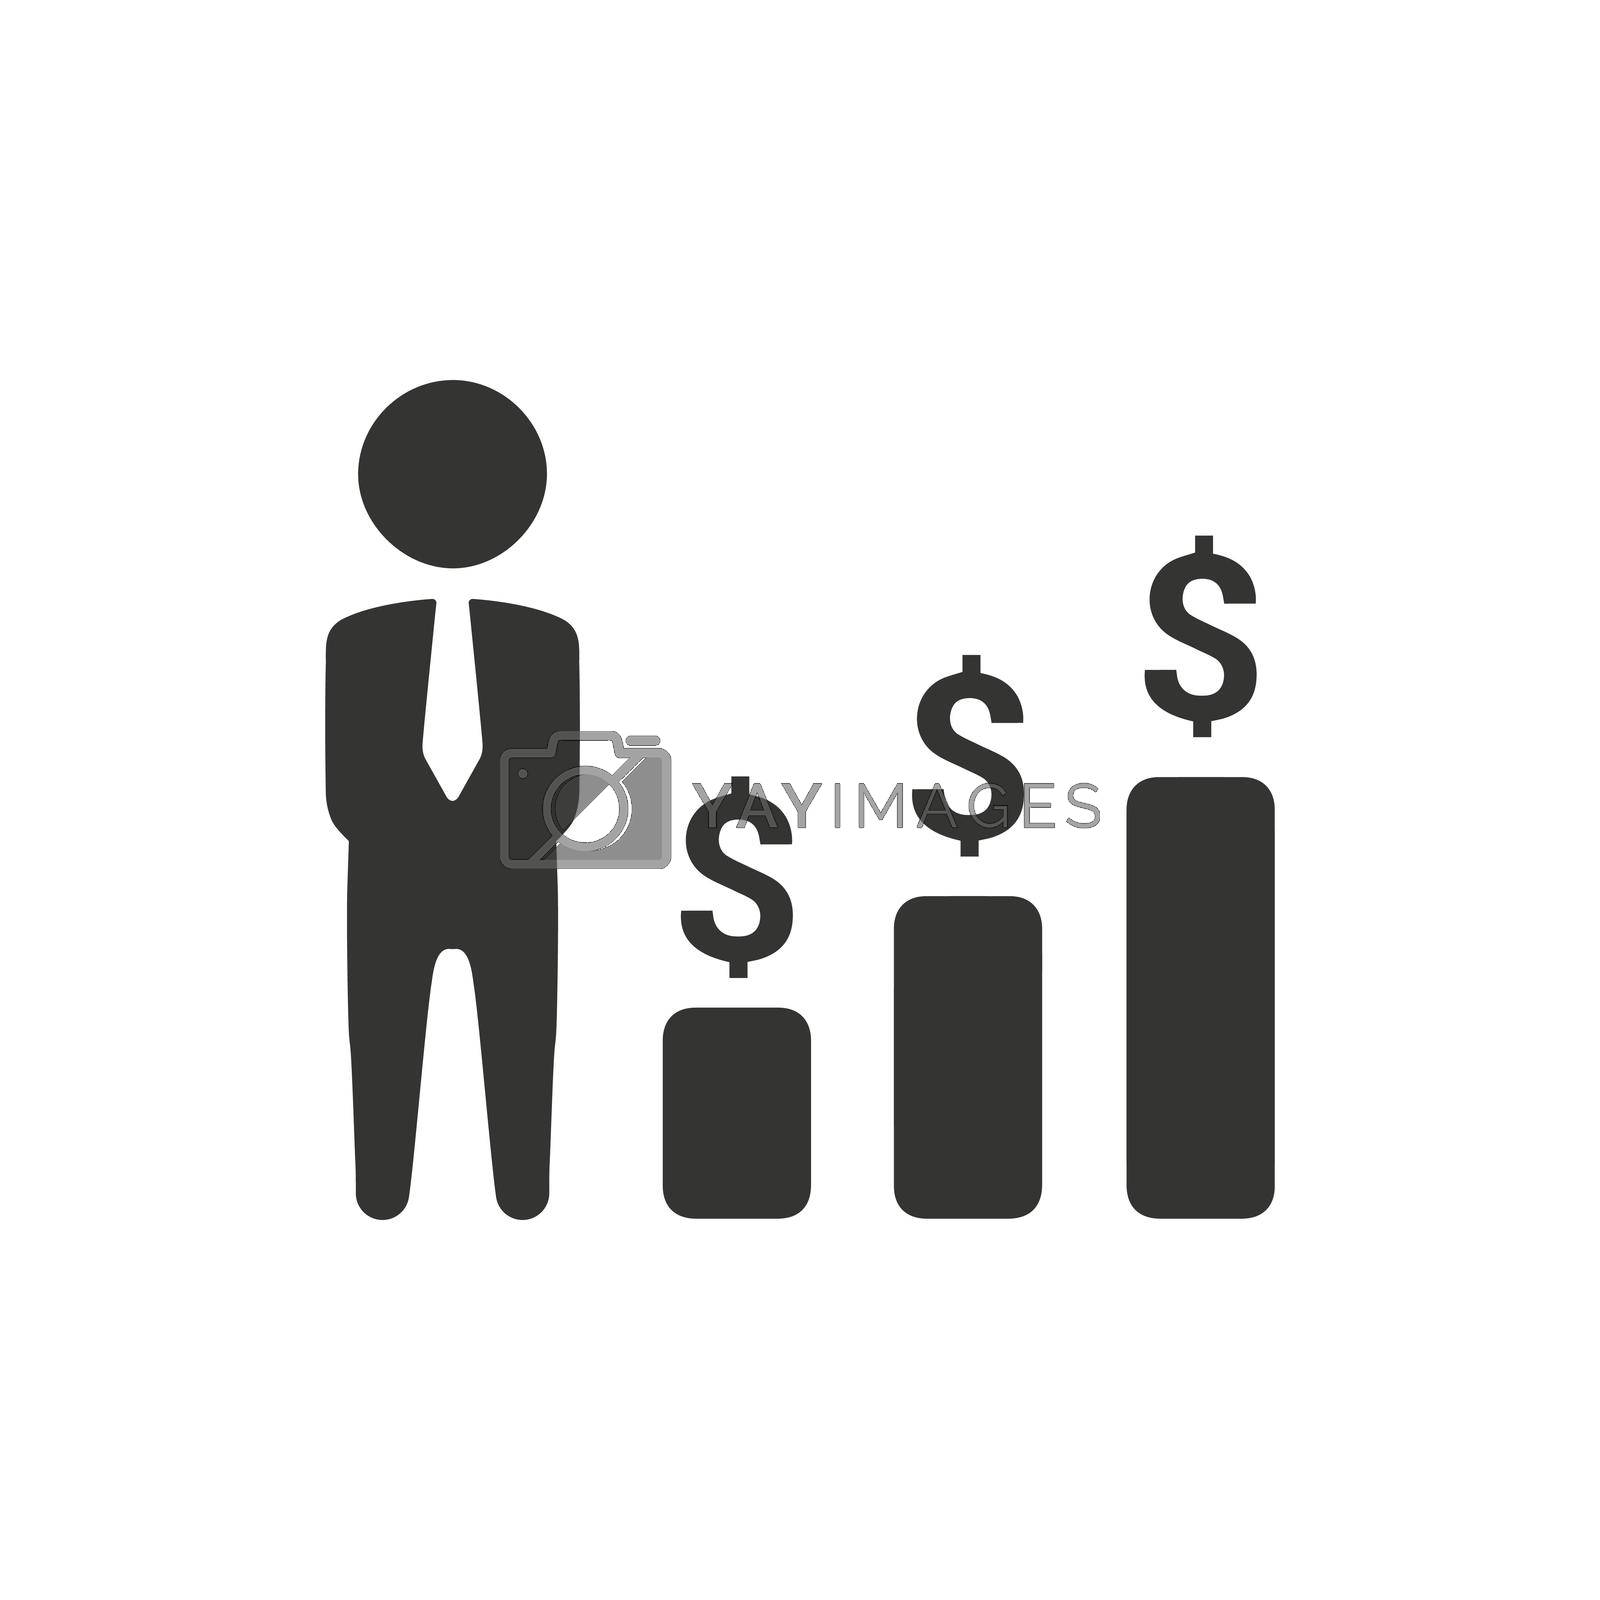 Business Financial Report icon. Vector EPS file.